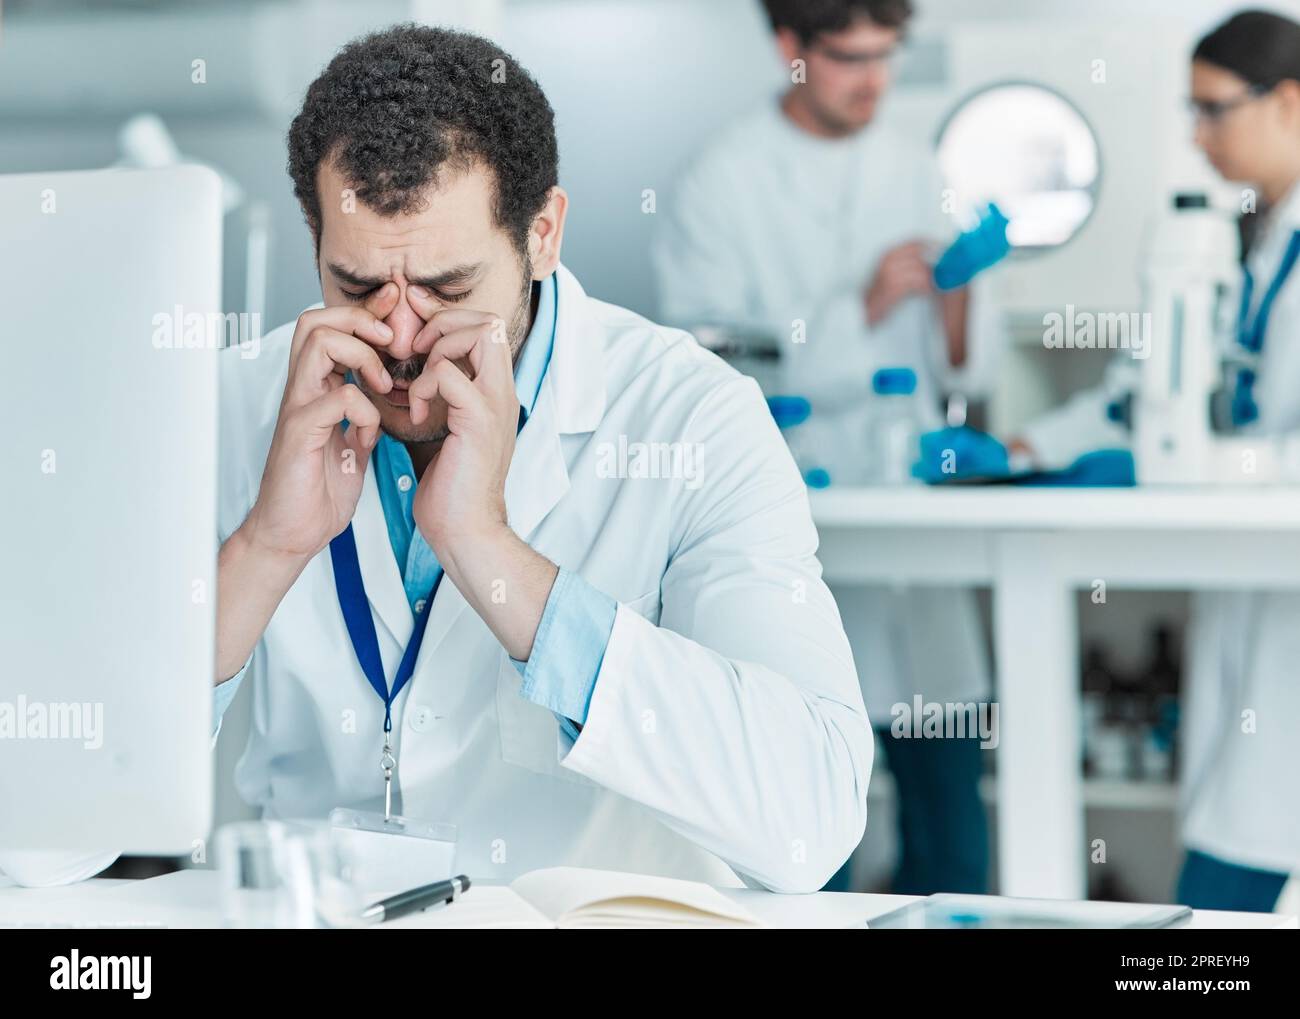 Oh no, I made an irreversible mistake. a young scientist looking stressed out while working on a computer in a lab Stock Photo